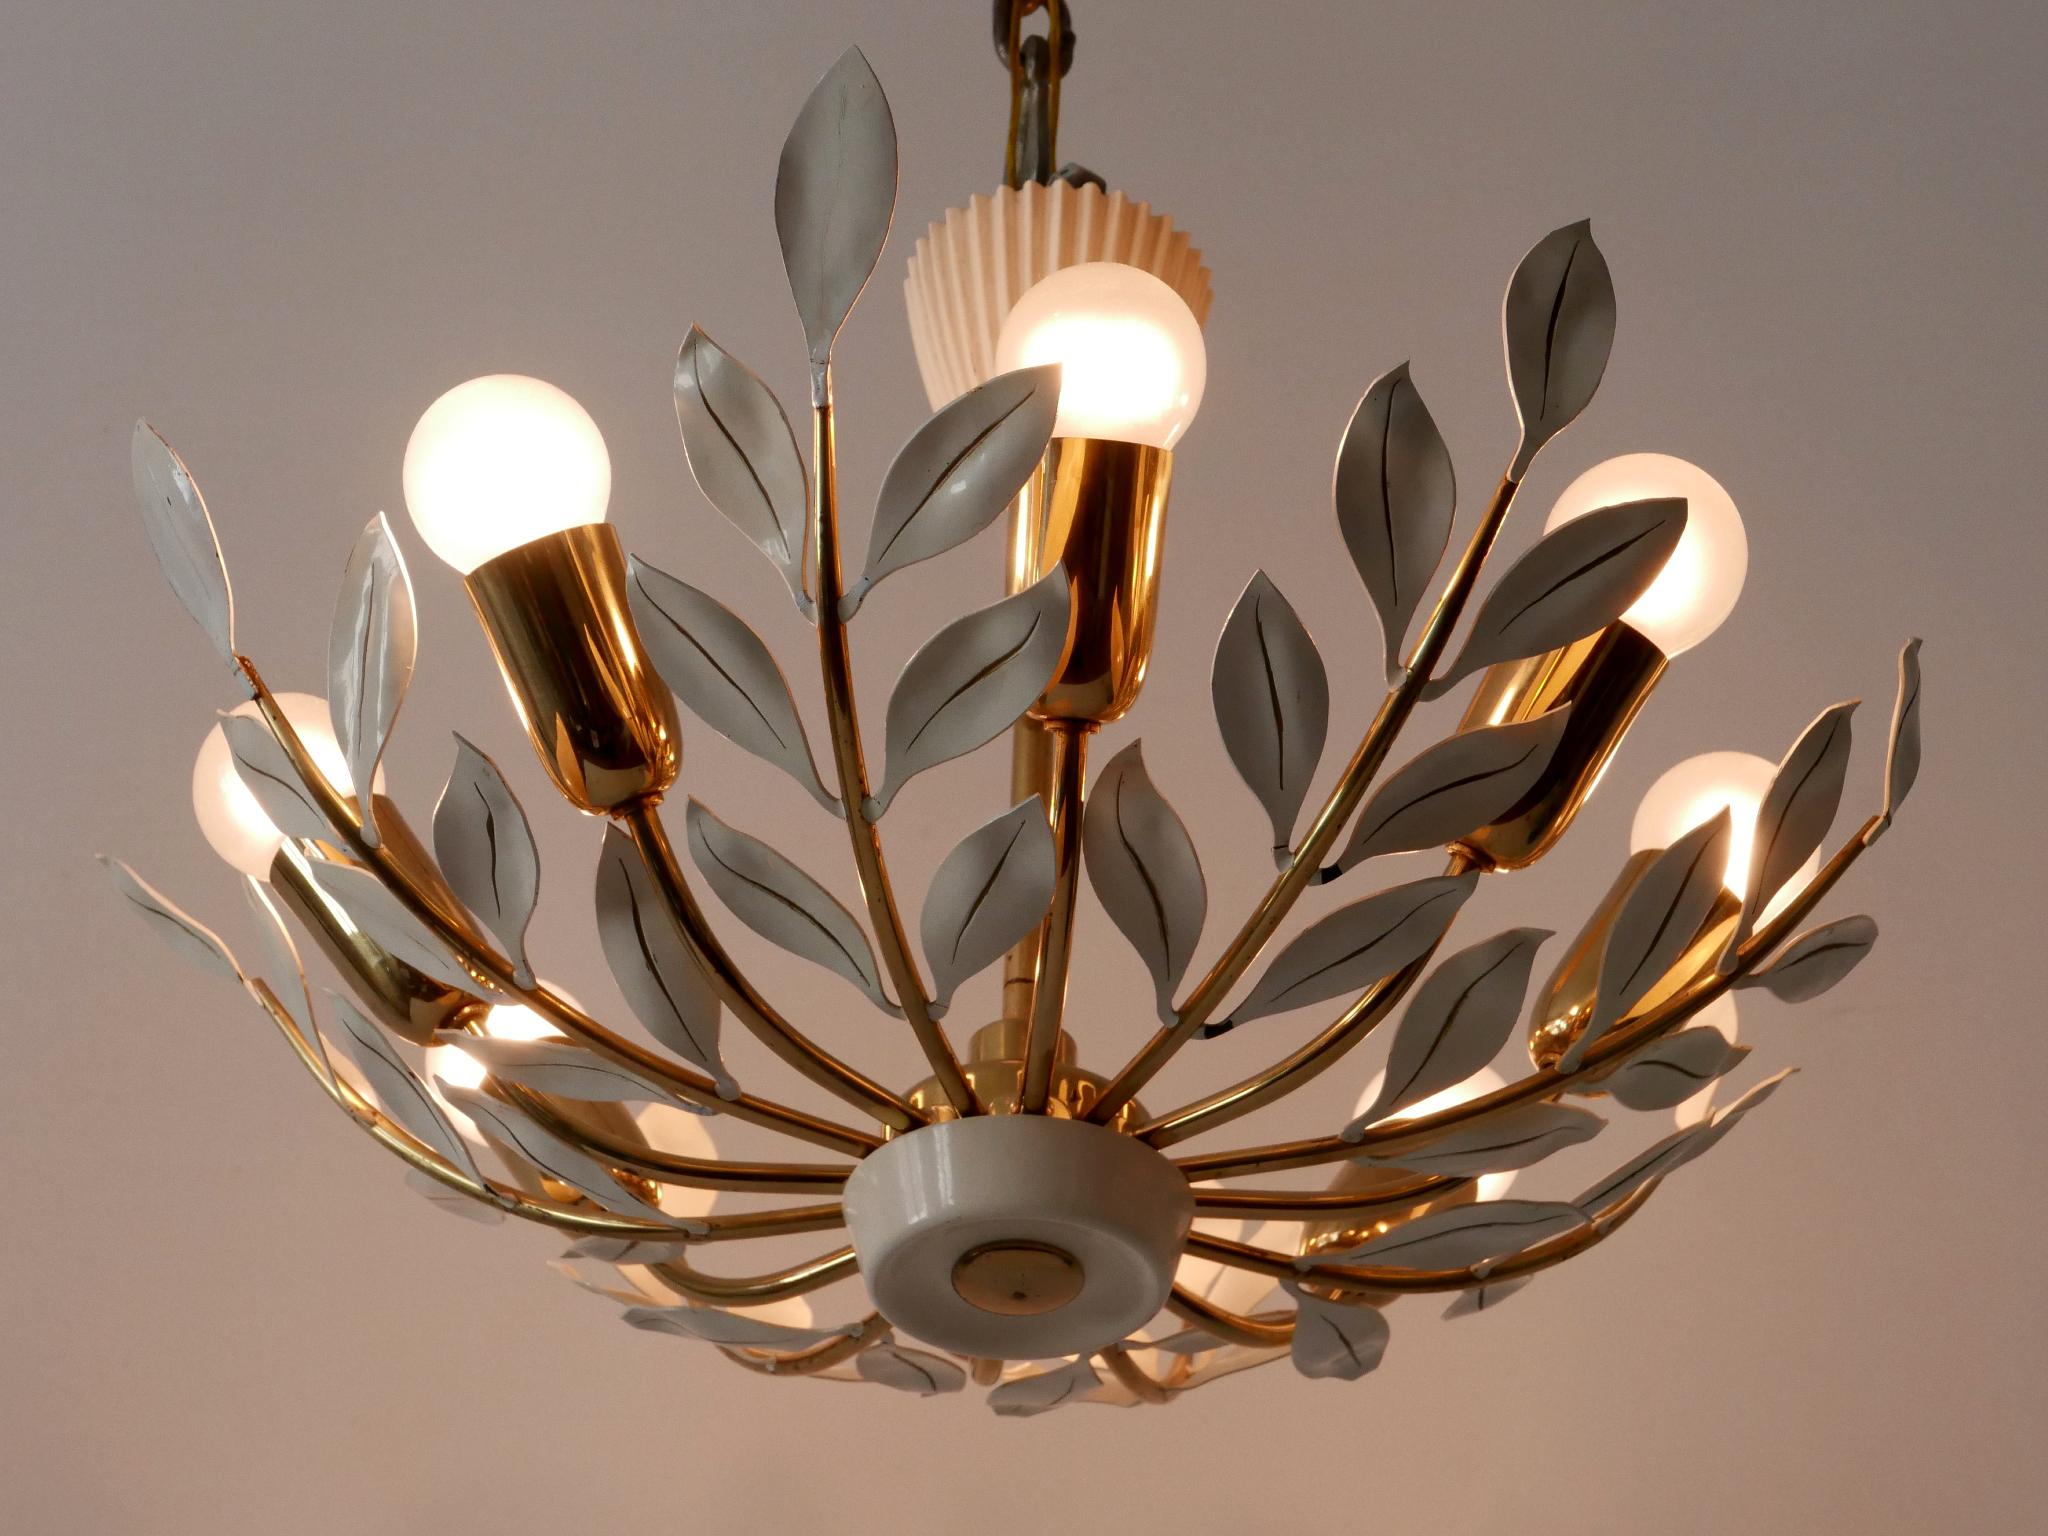 Rare, elegant & highly decorative Mid-Century Modern 8-flamed chandelier or pendant lamp. Designed and manufactured by Vereinigte Werkstätten, Germany, 1950s.

Executed in brass and metal, the chandelier needs 8 x E14 / E12 Edison screw fit bulbs.